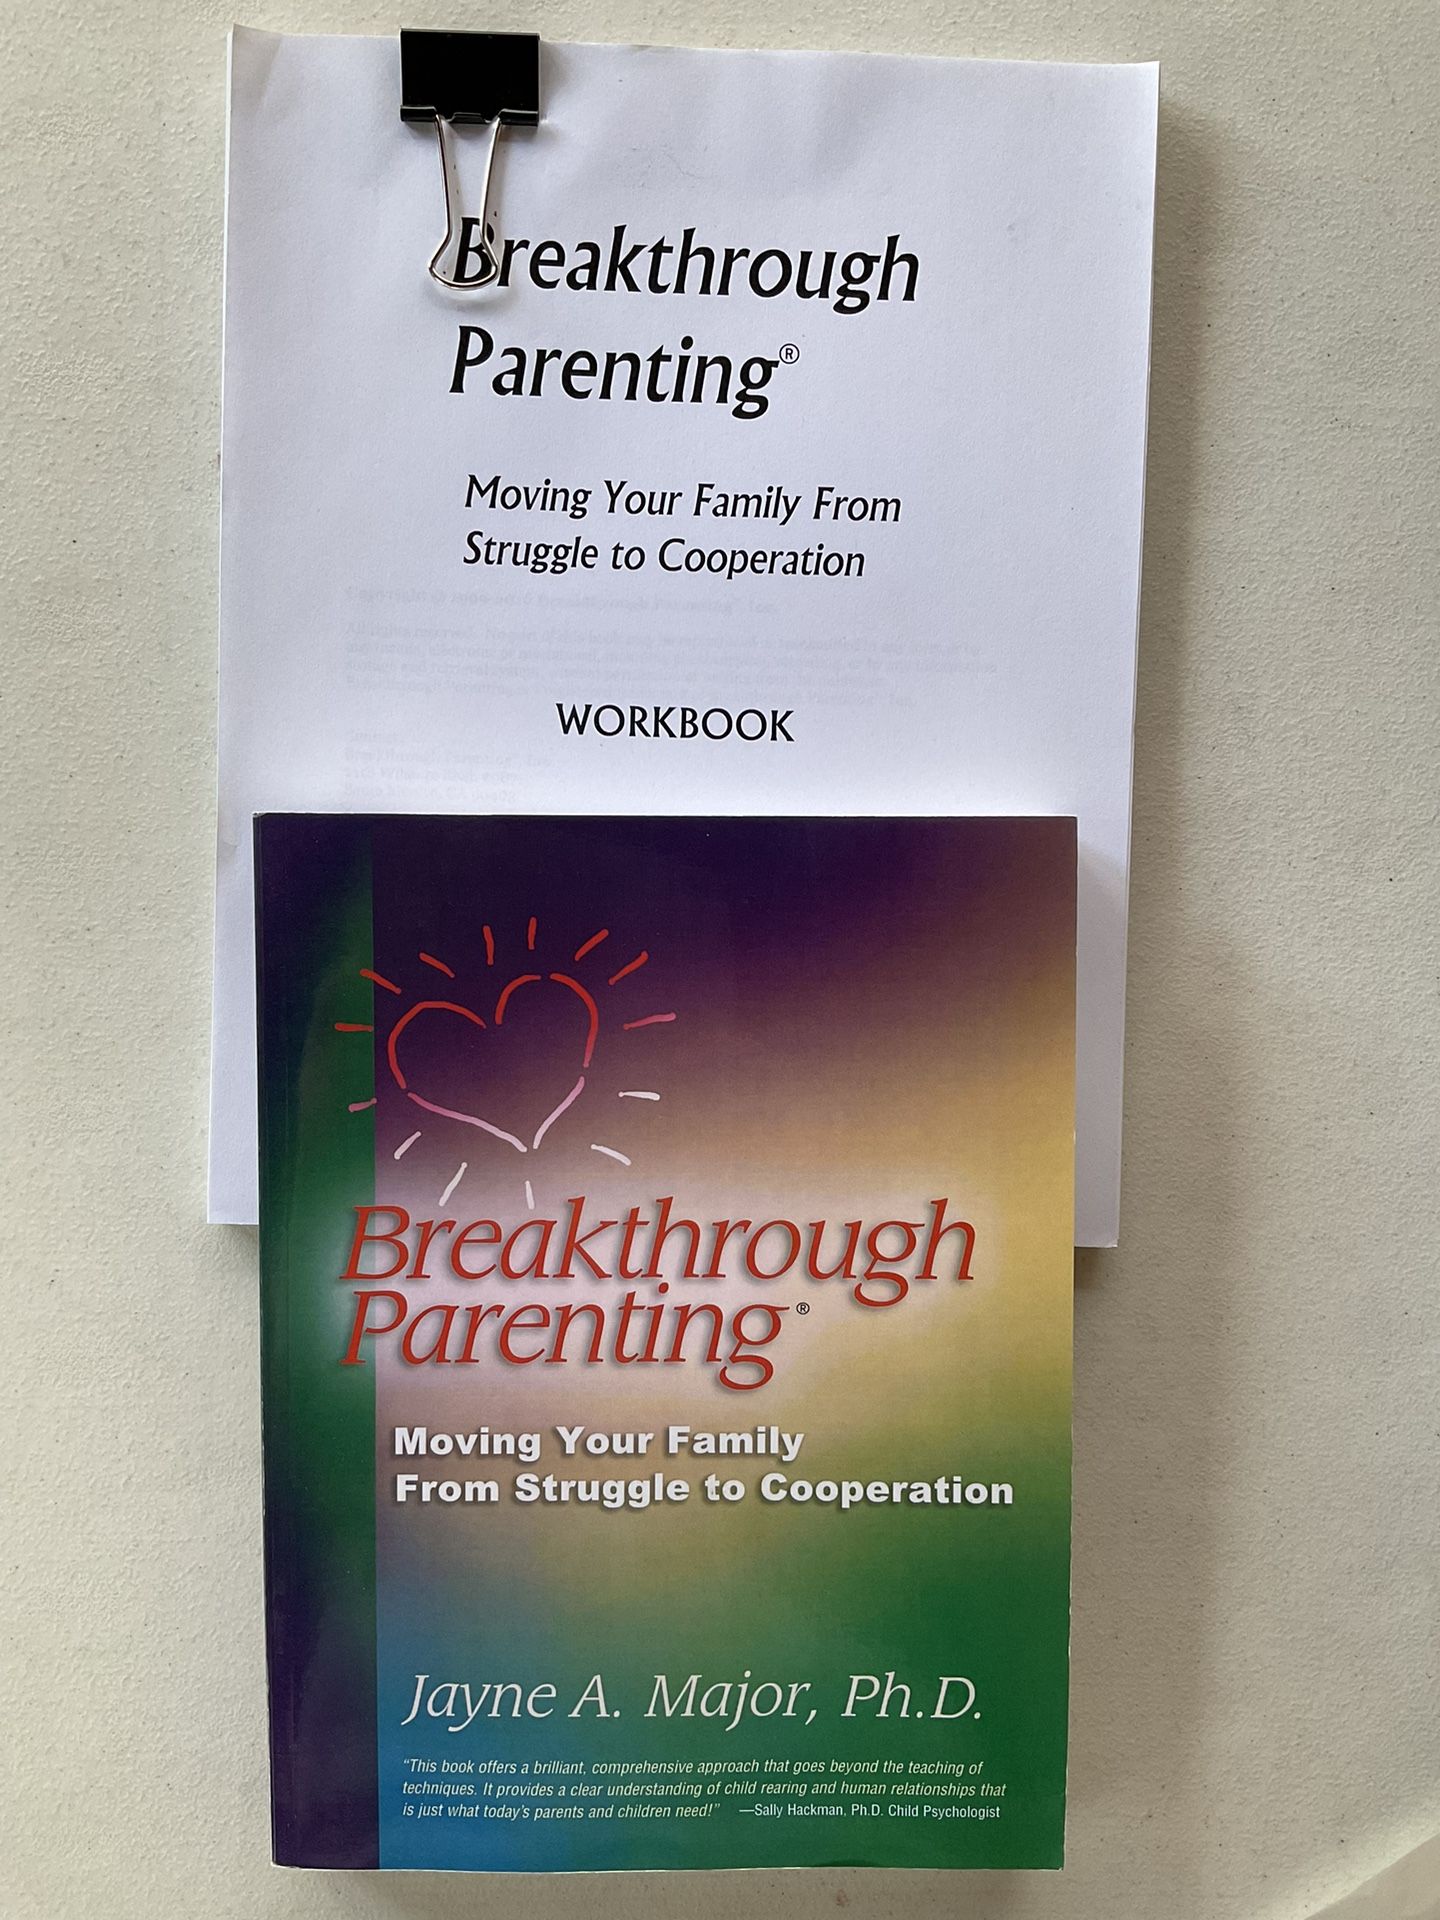 Breakthrough Parenting Paperback Text - Accompanied By Workbook - Parenting Education — $15 Cash, $18 If Shipping 